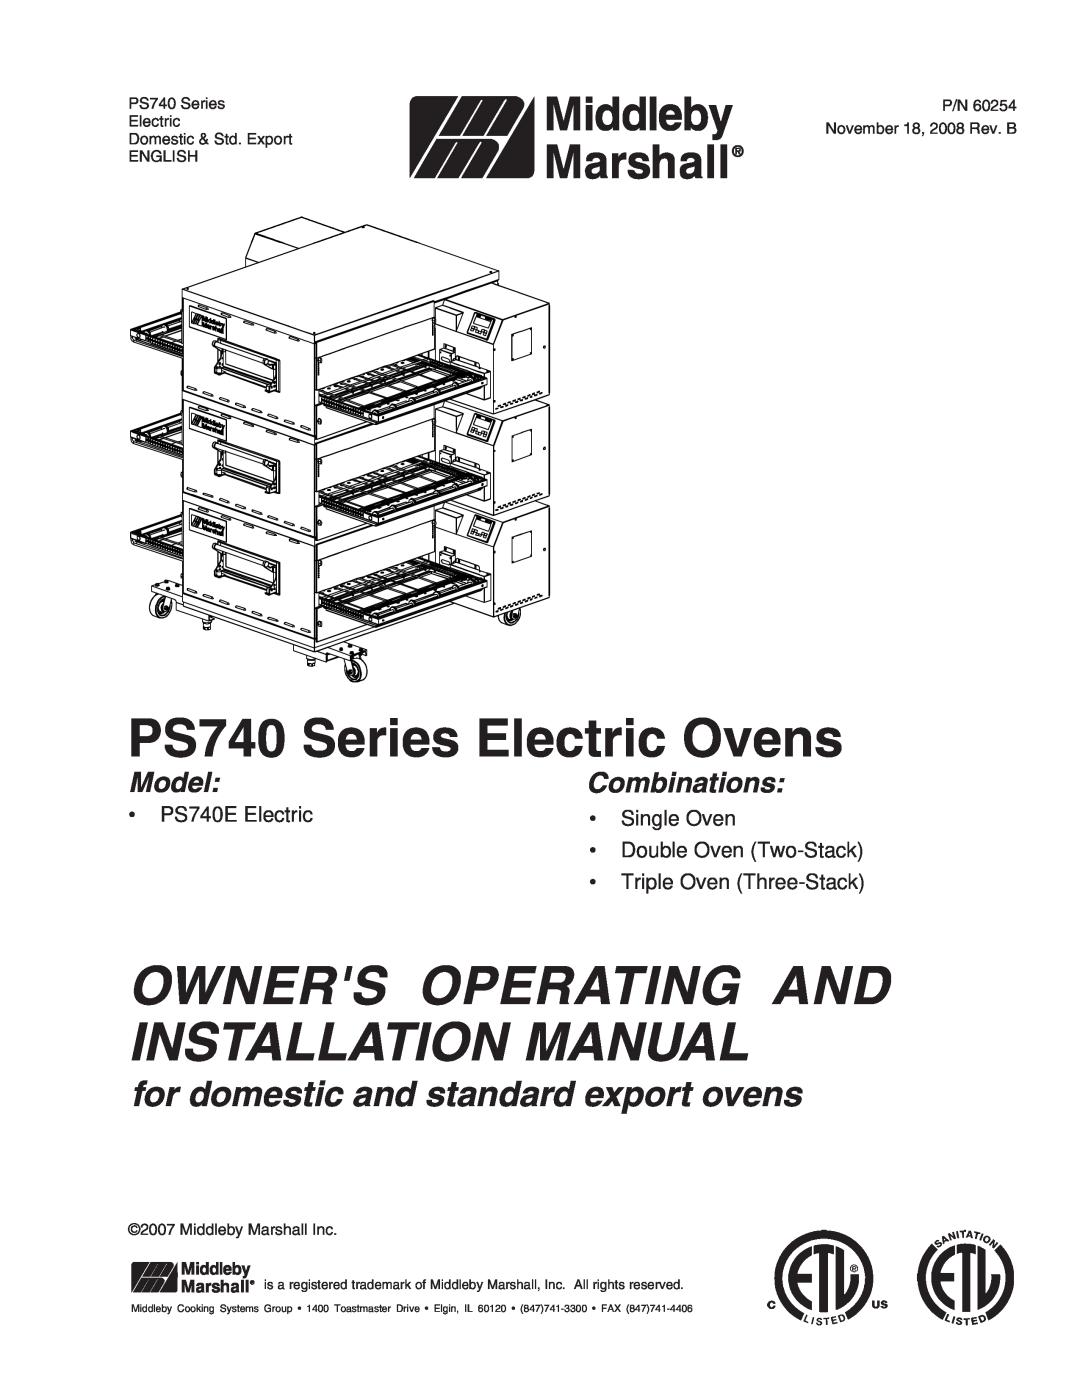 Middleby Marshall PS740E installation manual PS740 Series Electric Ovens, Owners Operating And Installation Manual, Model 